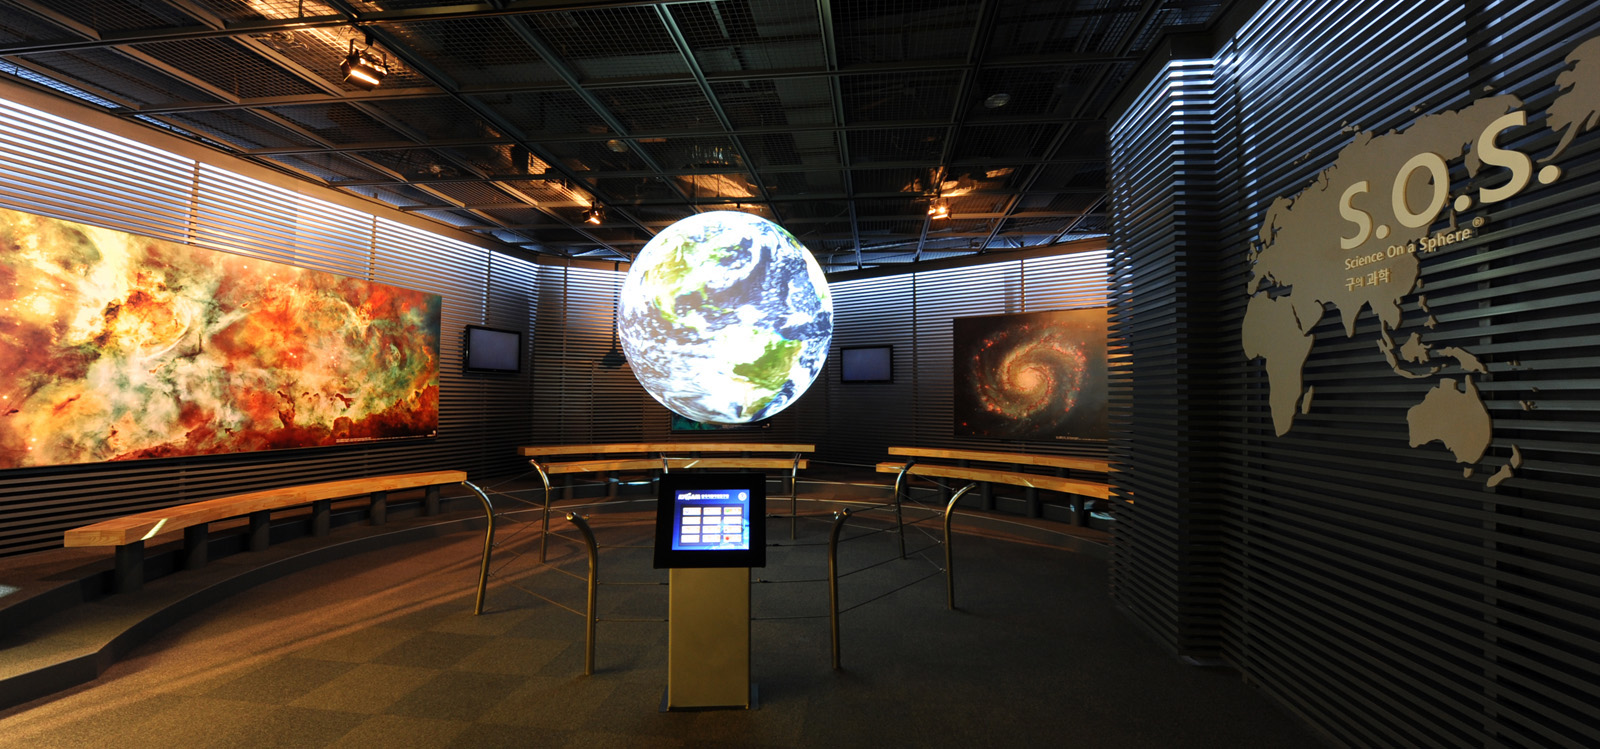 Science On a Sphere displays satellite imagery of Earth in an empty room. A touchscreen sits in front of the Sphere, and behind it are several benches. Photos of a galaxy and a nebula adorn the walls in the background